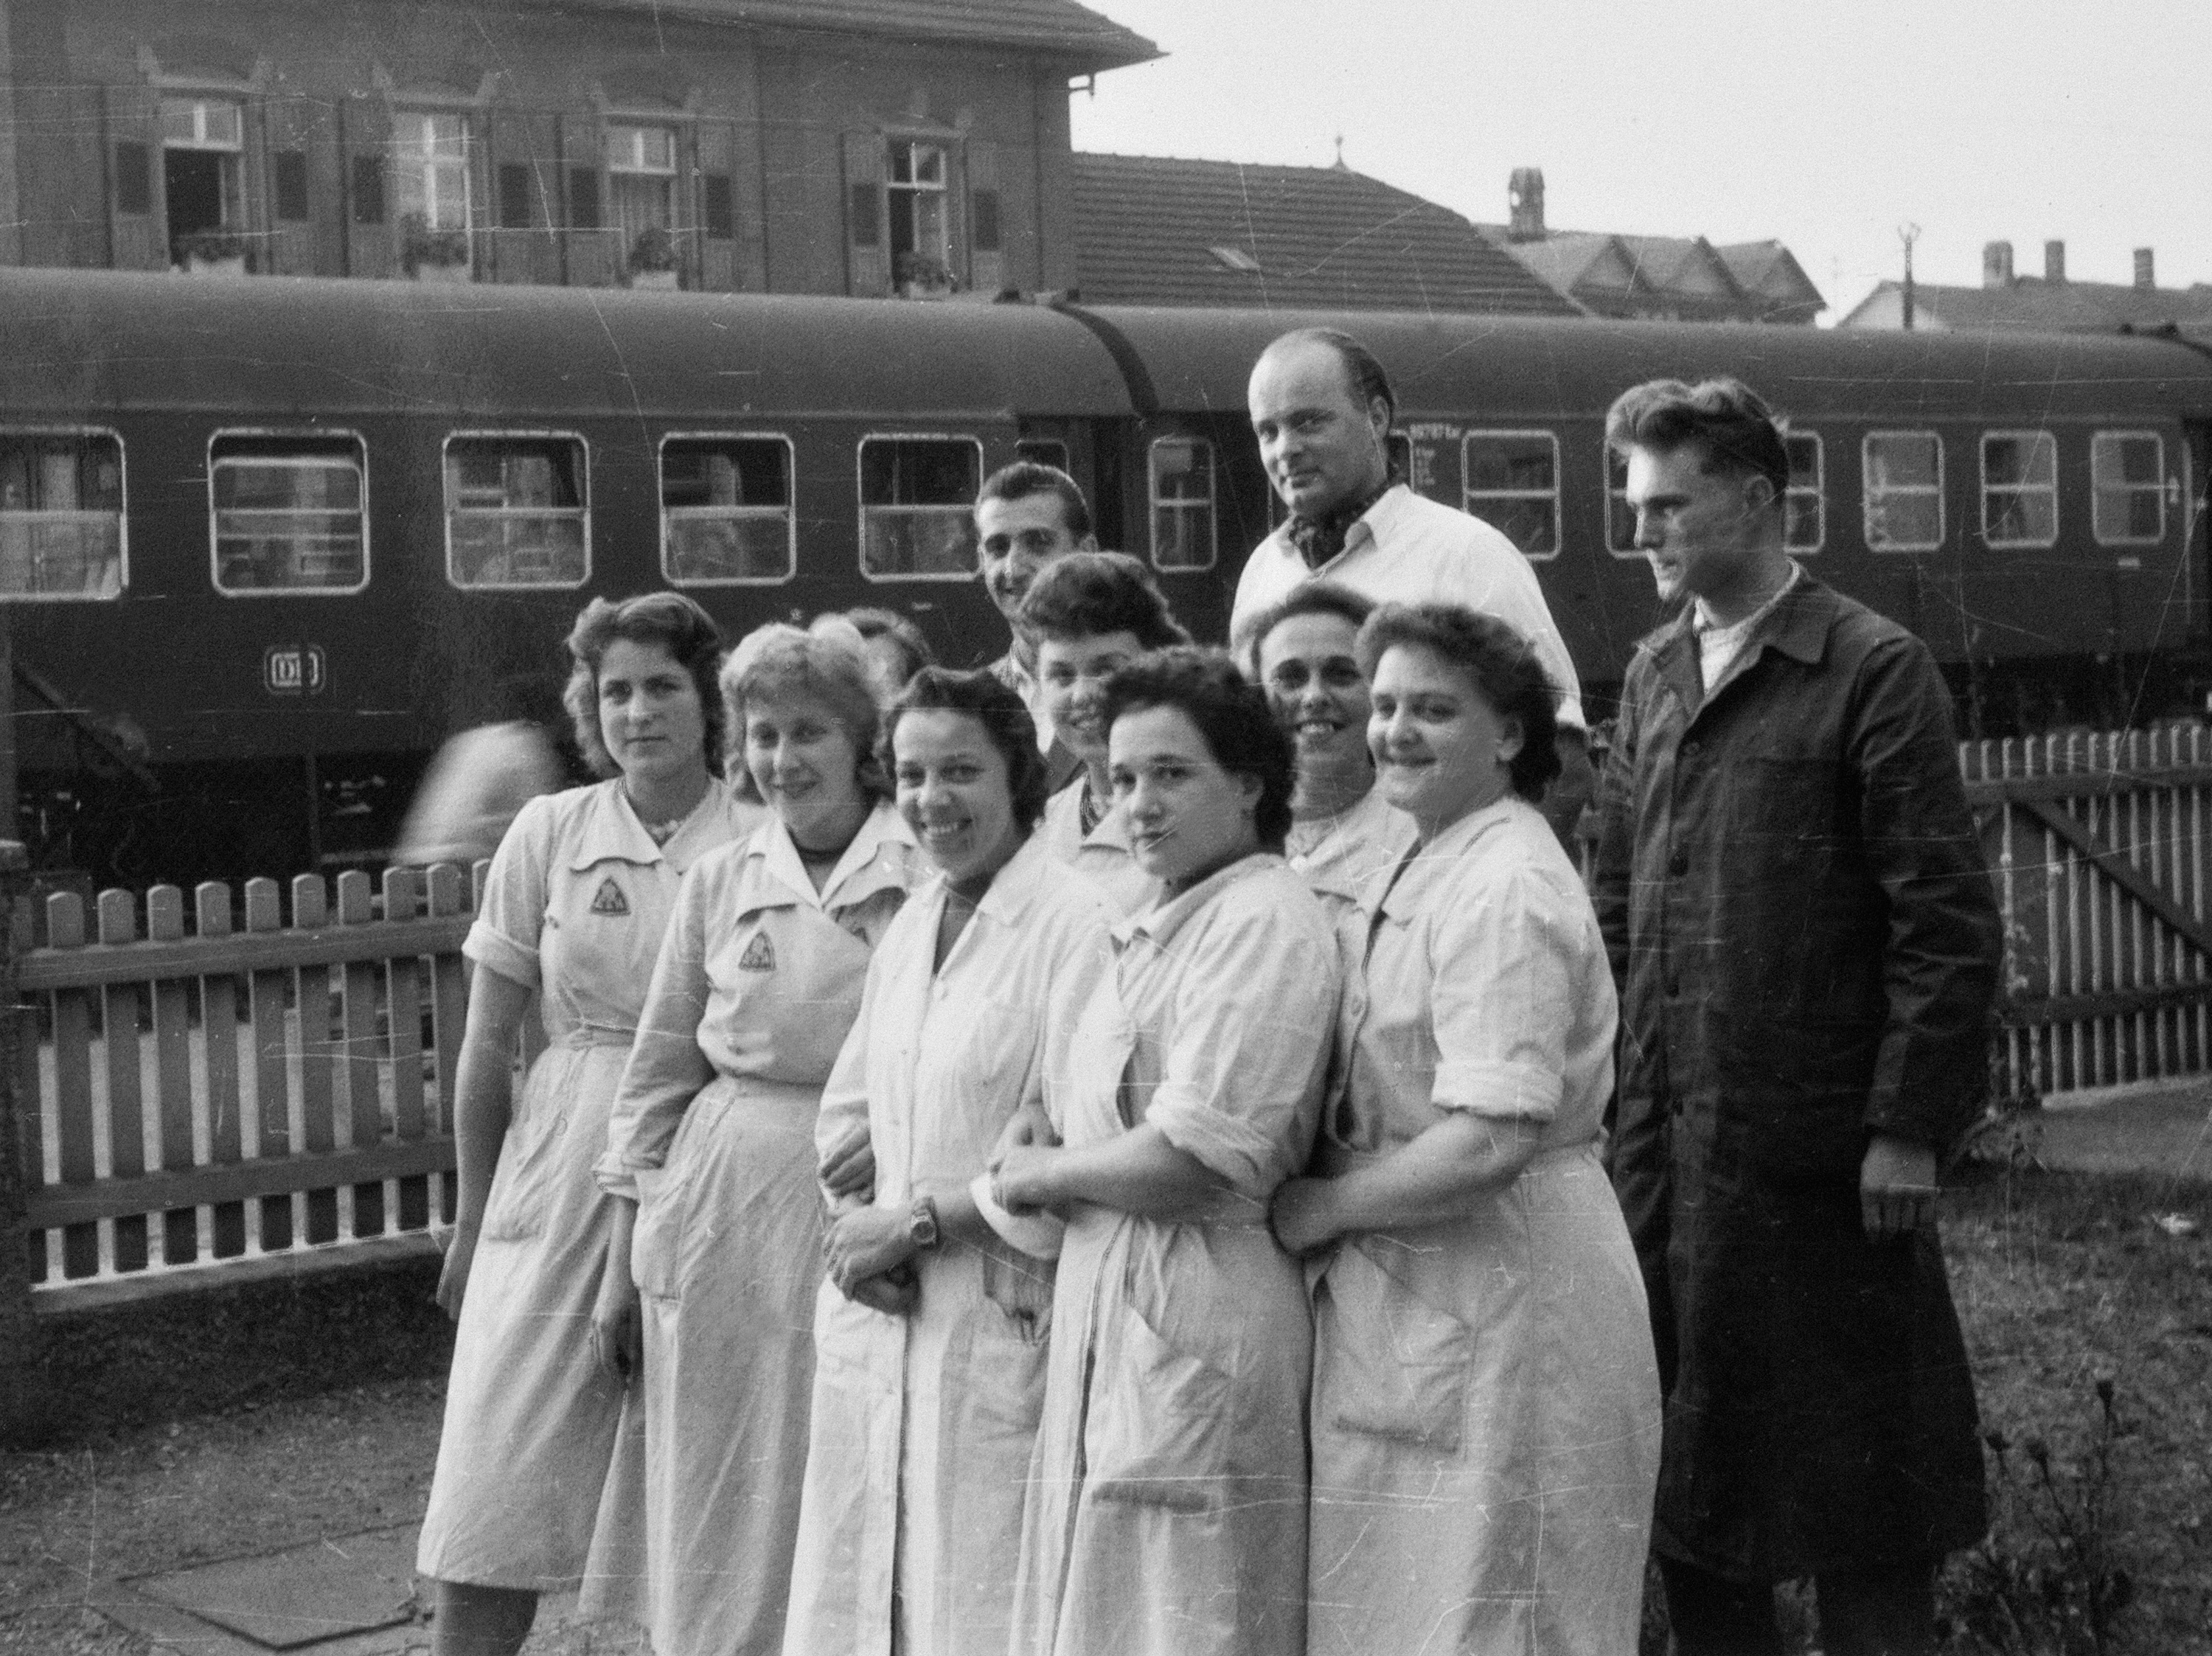 Georg H Endress in the 1950s with employees from production in Lörrach, Germany.